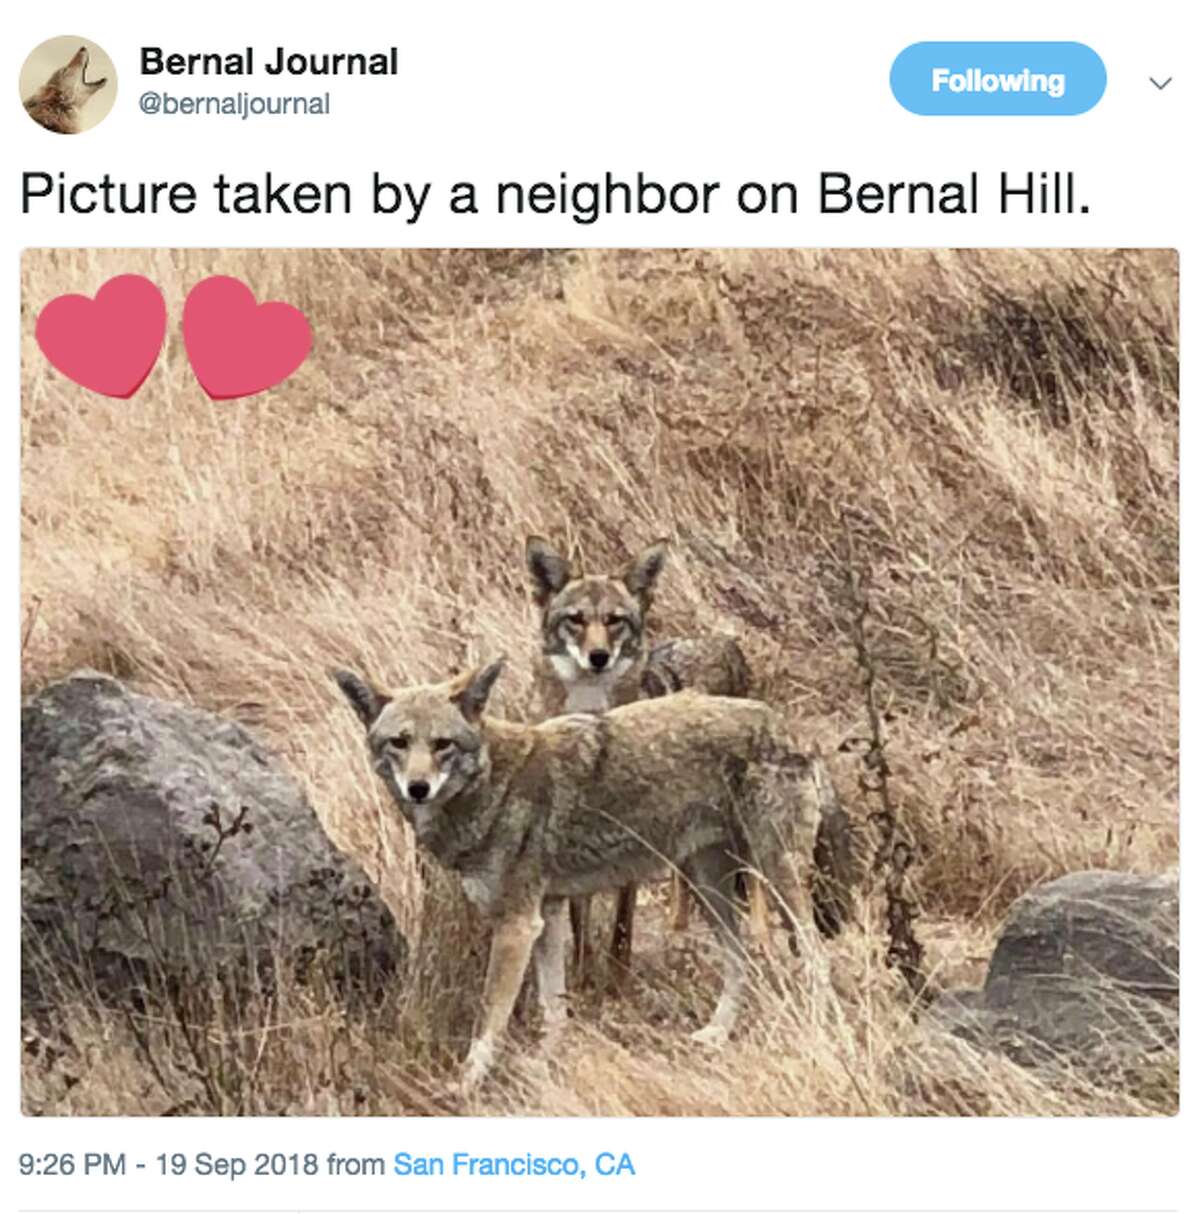 The Twitter account @bernaljournal shares an image on Sept. 19, 2018, of the two coyotes living on Bernal Hill in San Francisco's Bernal Heights neighborhood.